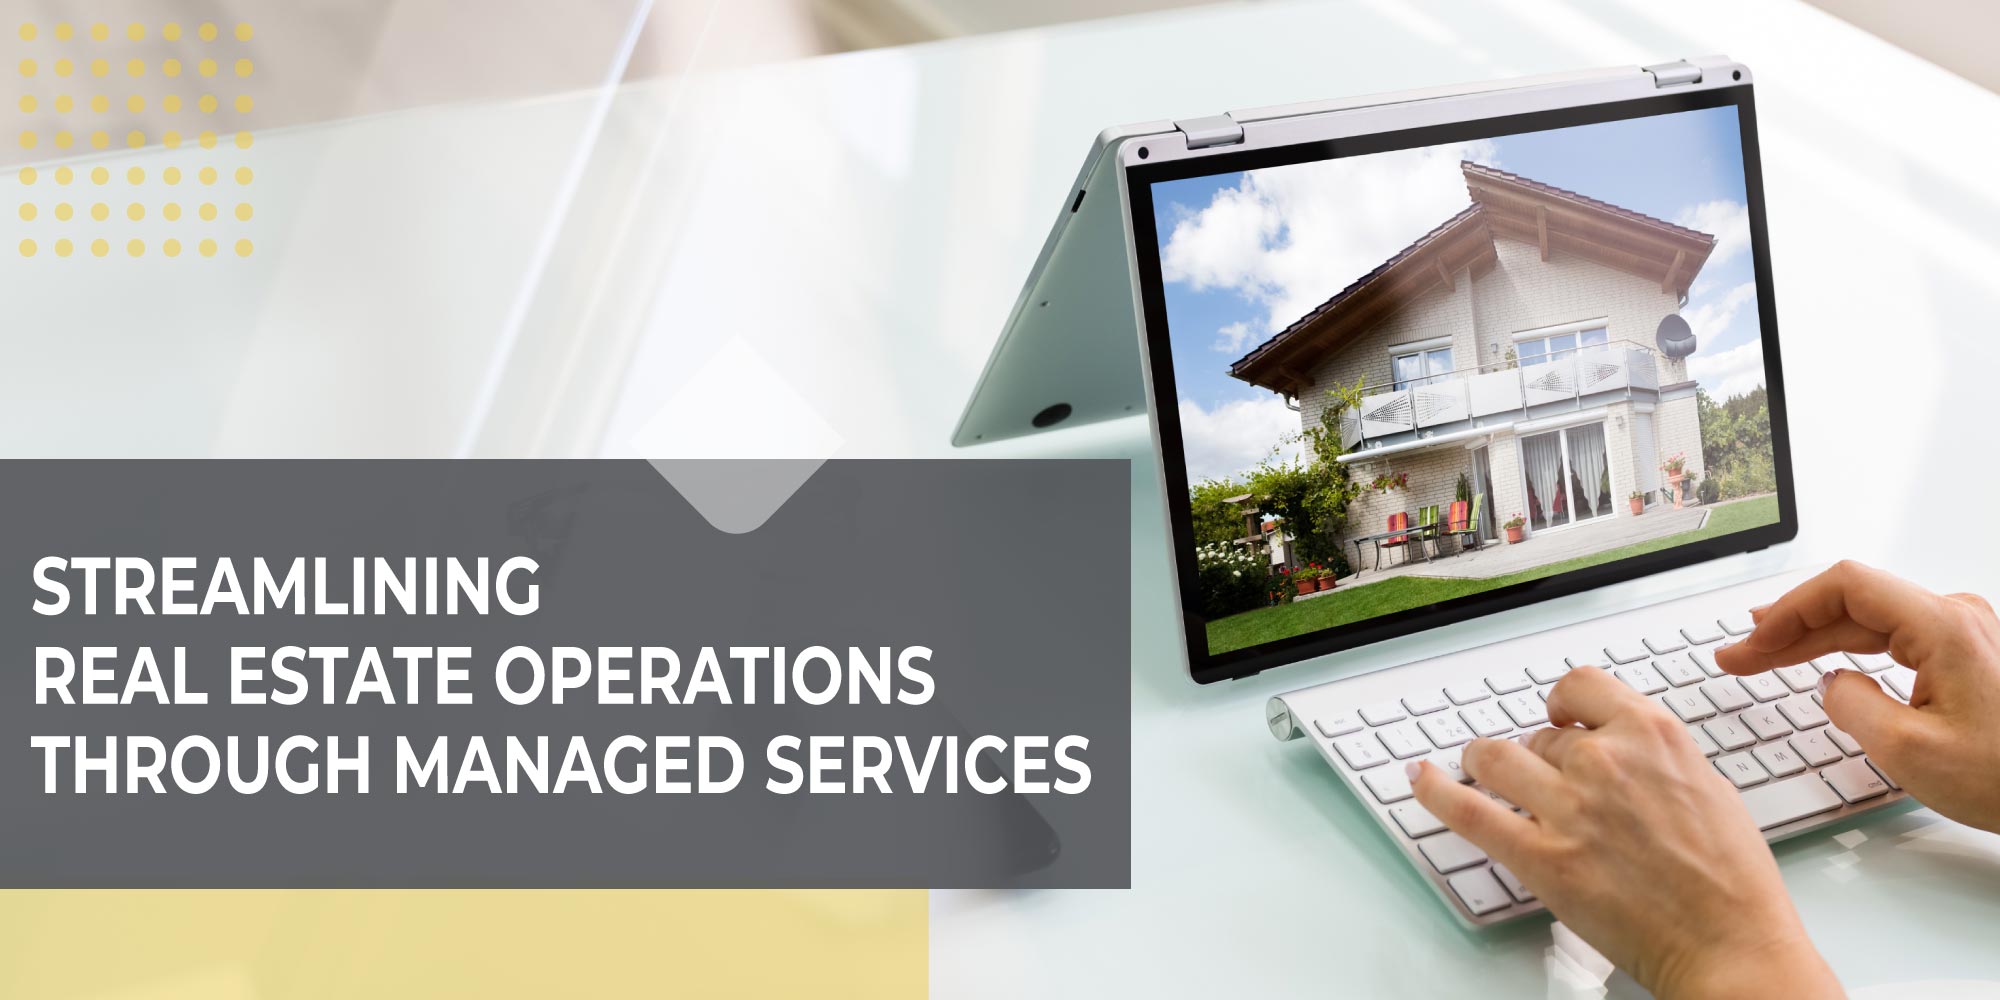 streamlining real estate operations through managed services